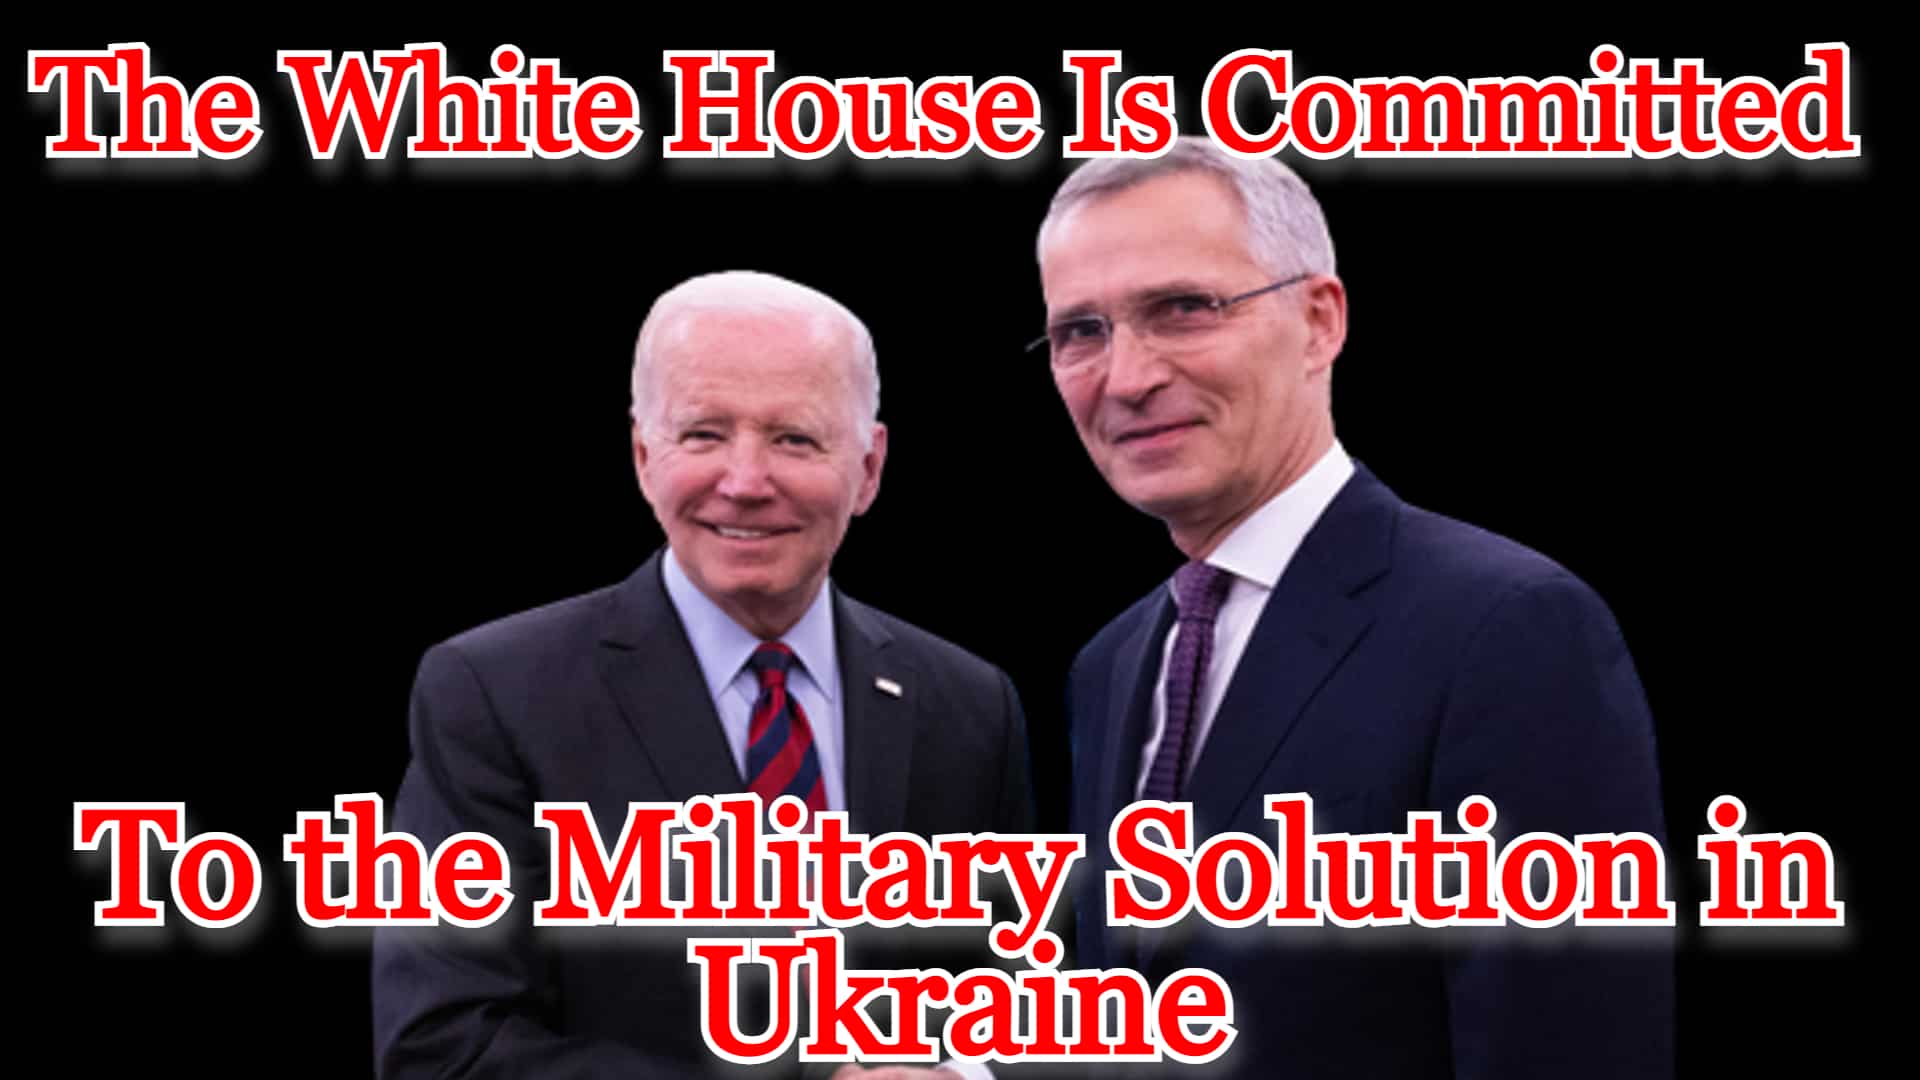 COI #301: The White House Is Committed to the Military Solution in Ukraine